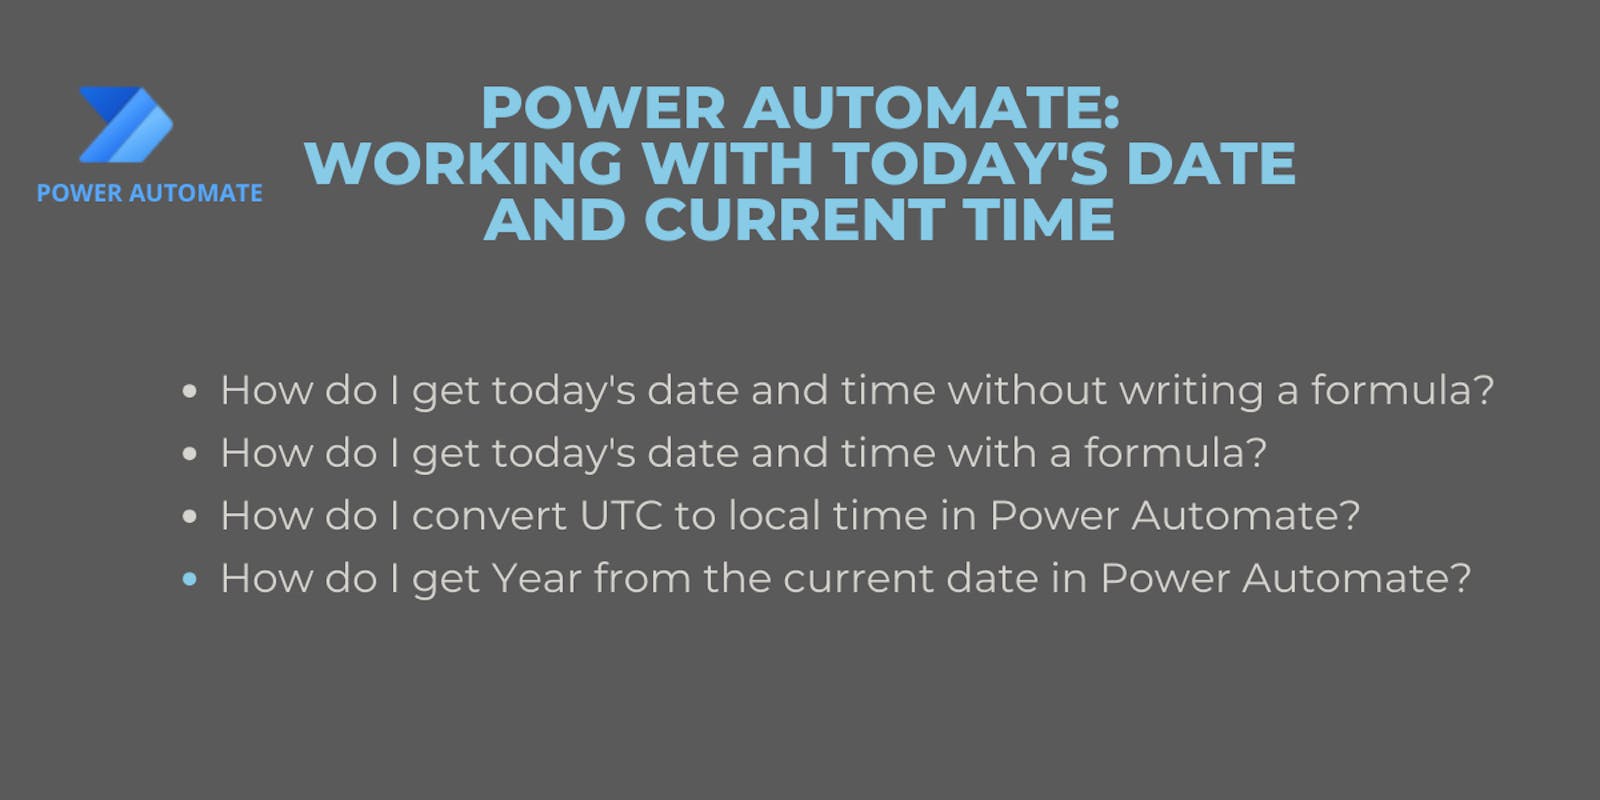 Power Automate: How to get todays date and current time.